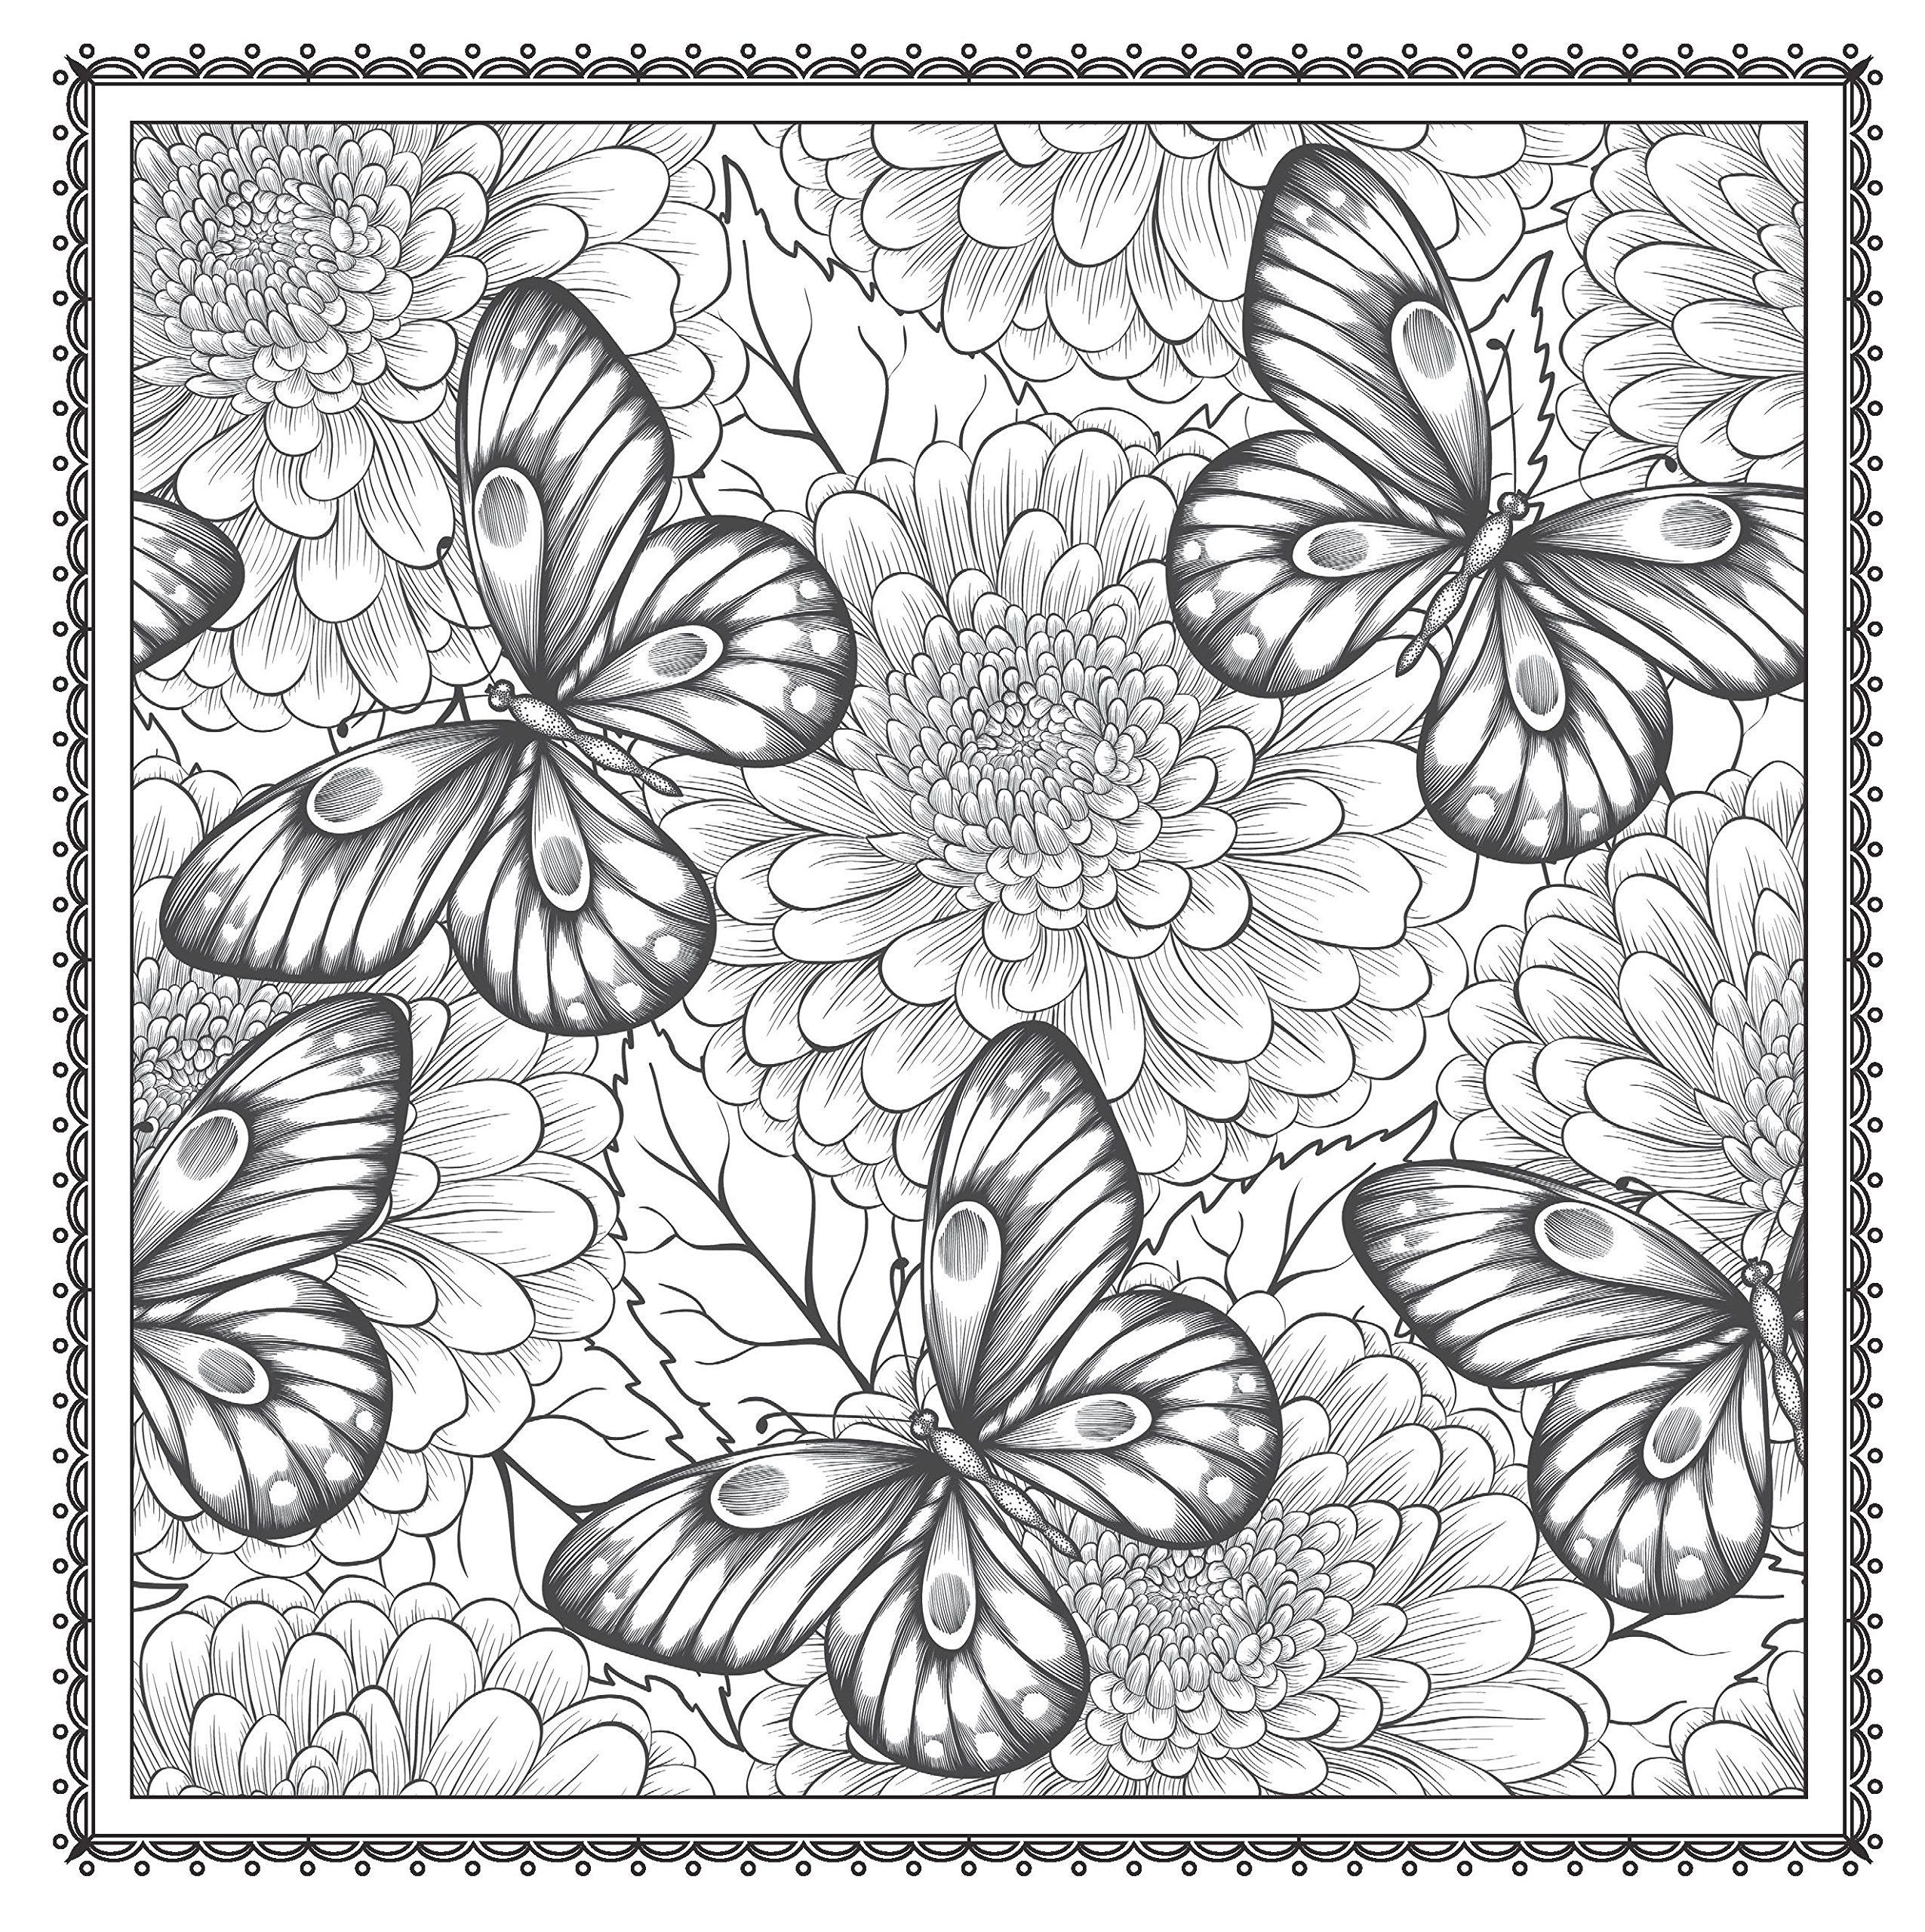 Adult Coloring Book Patterns
 Amazon Blossom Magic Beautiful Floral Patterns